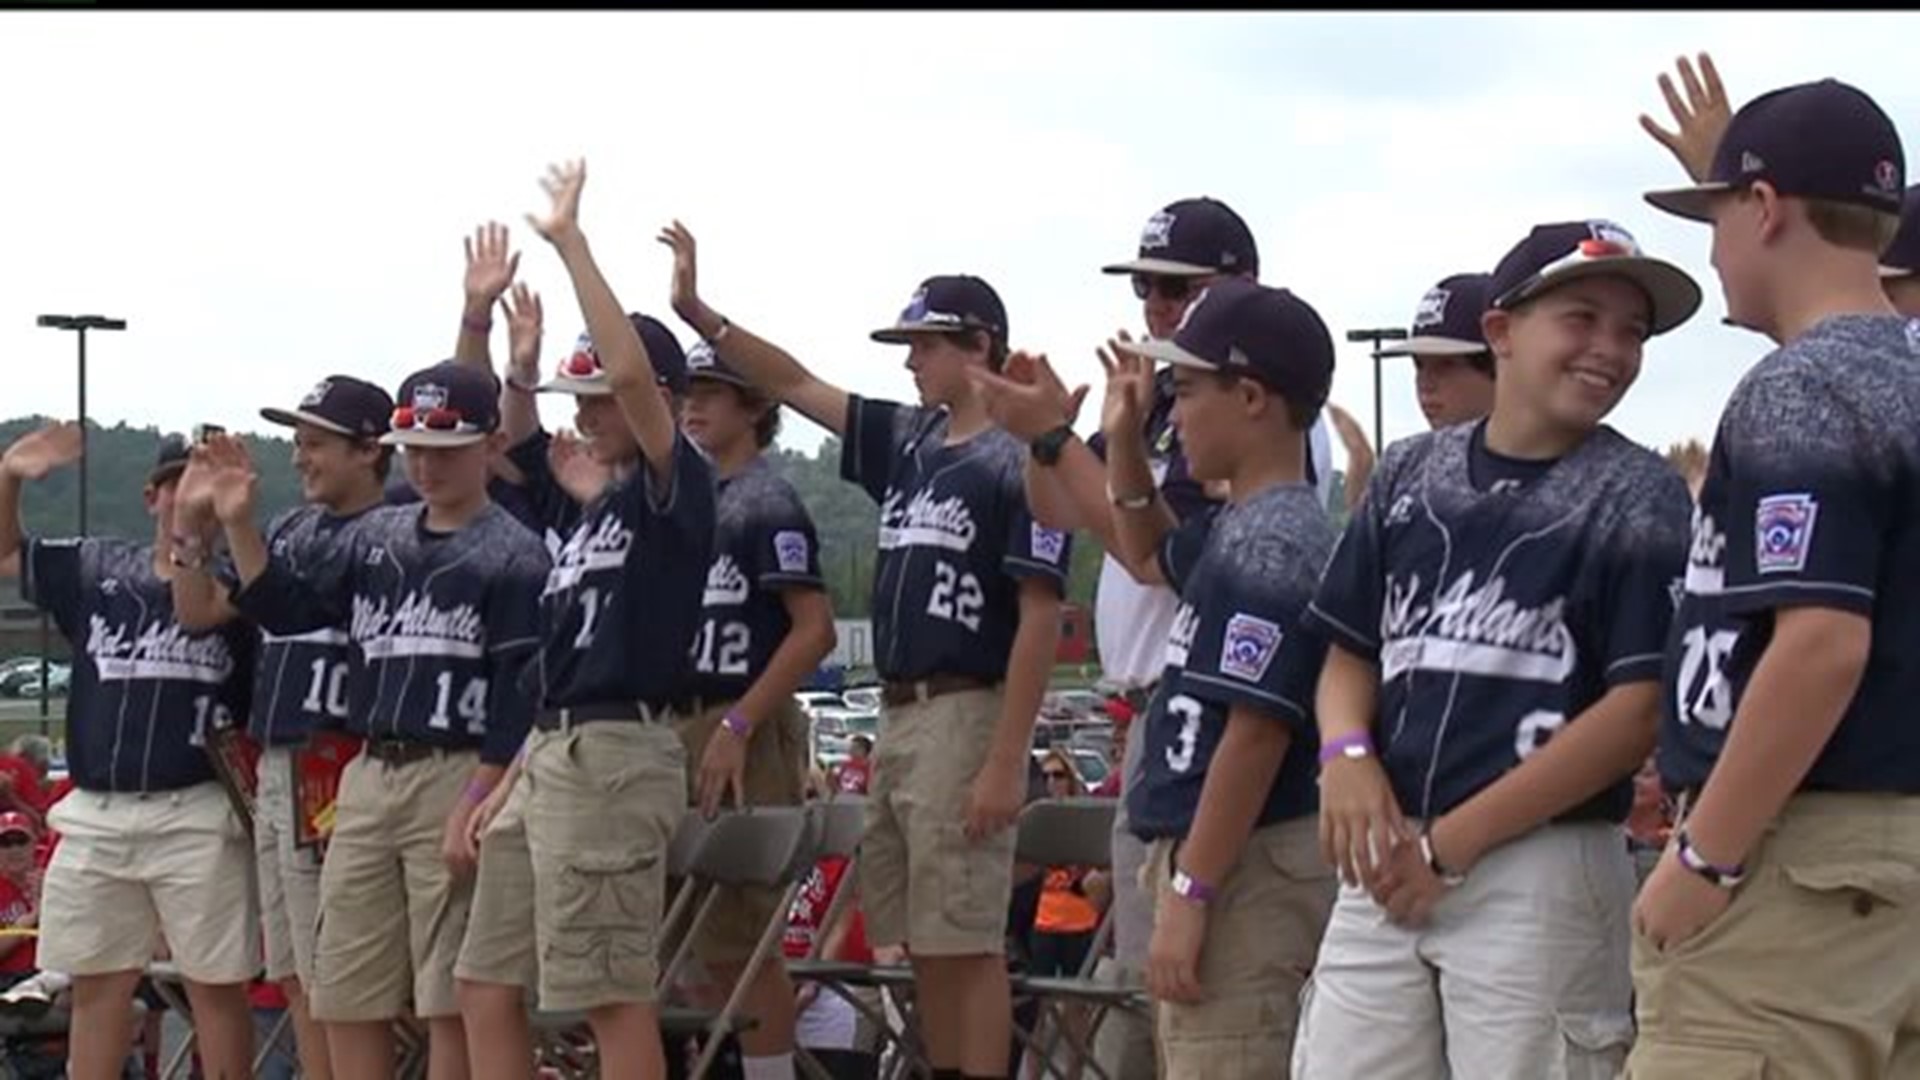 Over $200,000 raised for Red Land Little League; community celebrates win